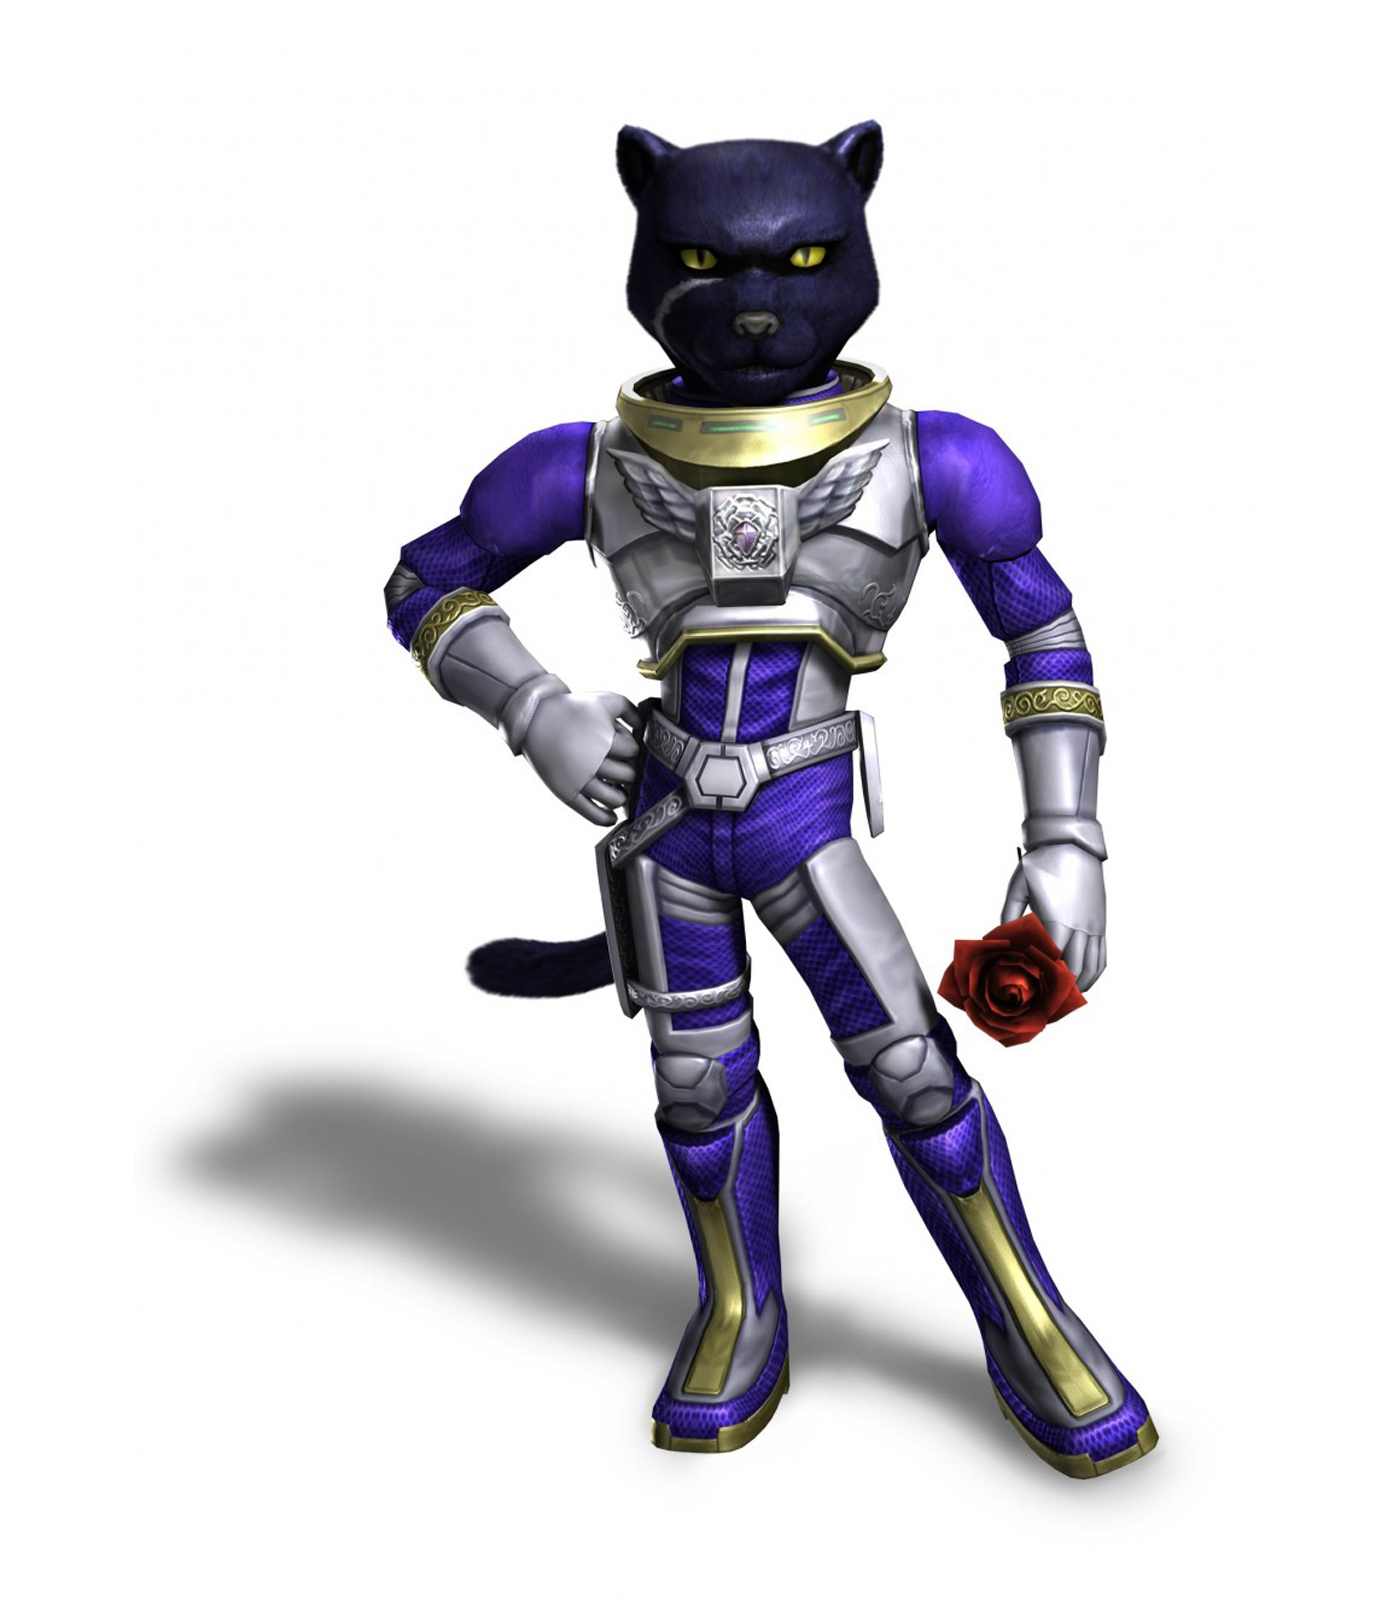 Panther Caroso is an anthropomorphic Panther in the Star Fox Series. 